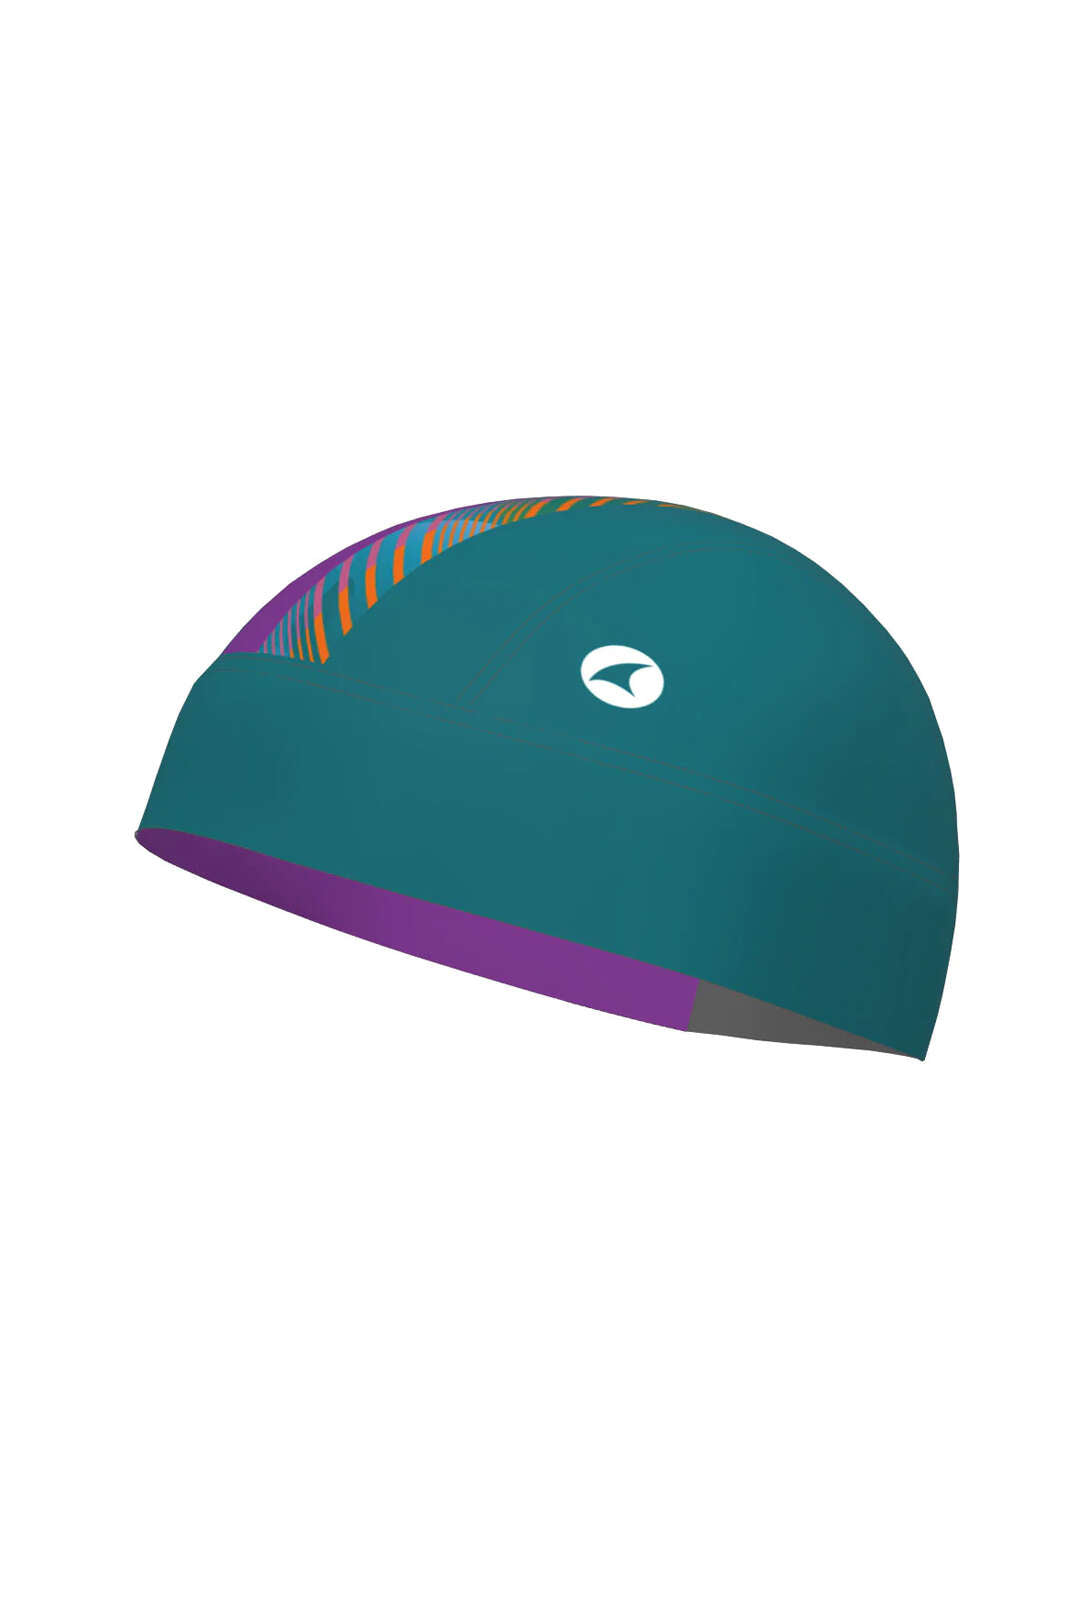 Custom Cycling Skull Cap for Summer - Front View